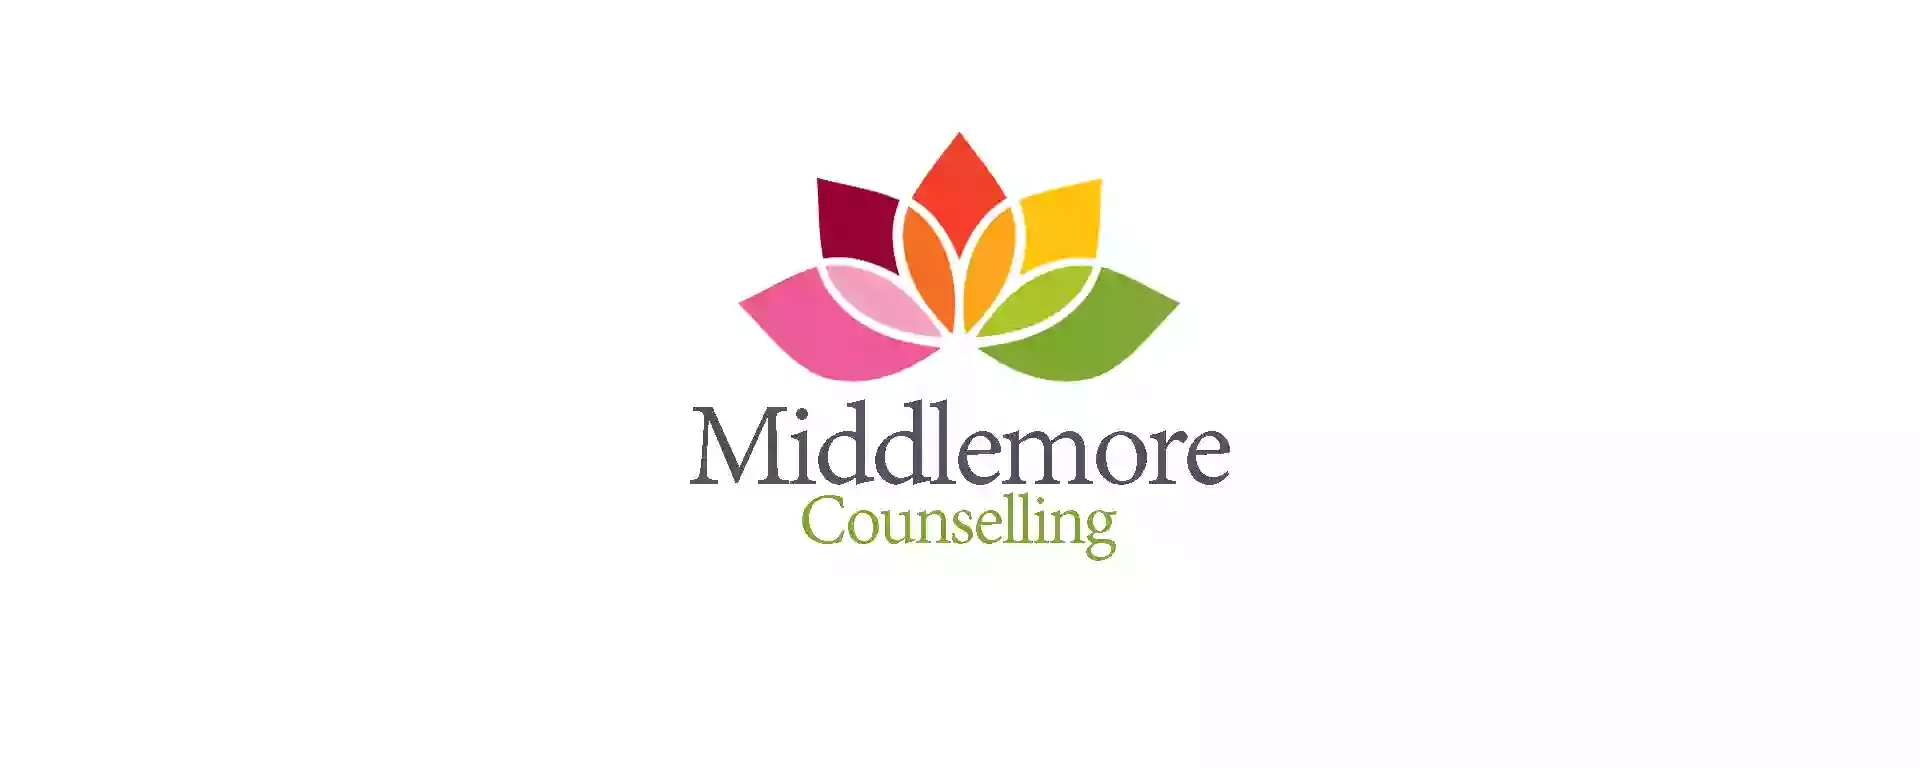 Middlemore Counselling